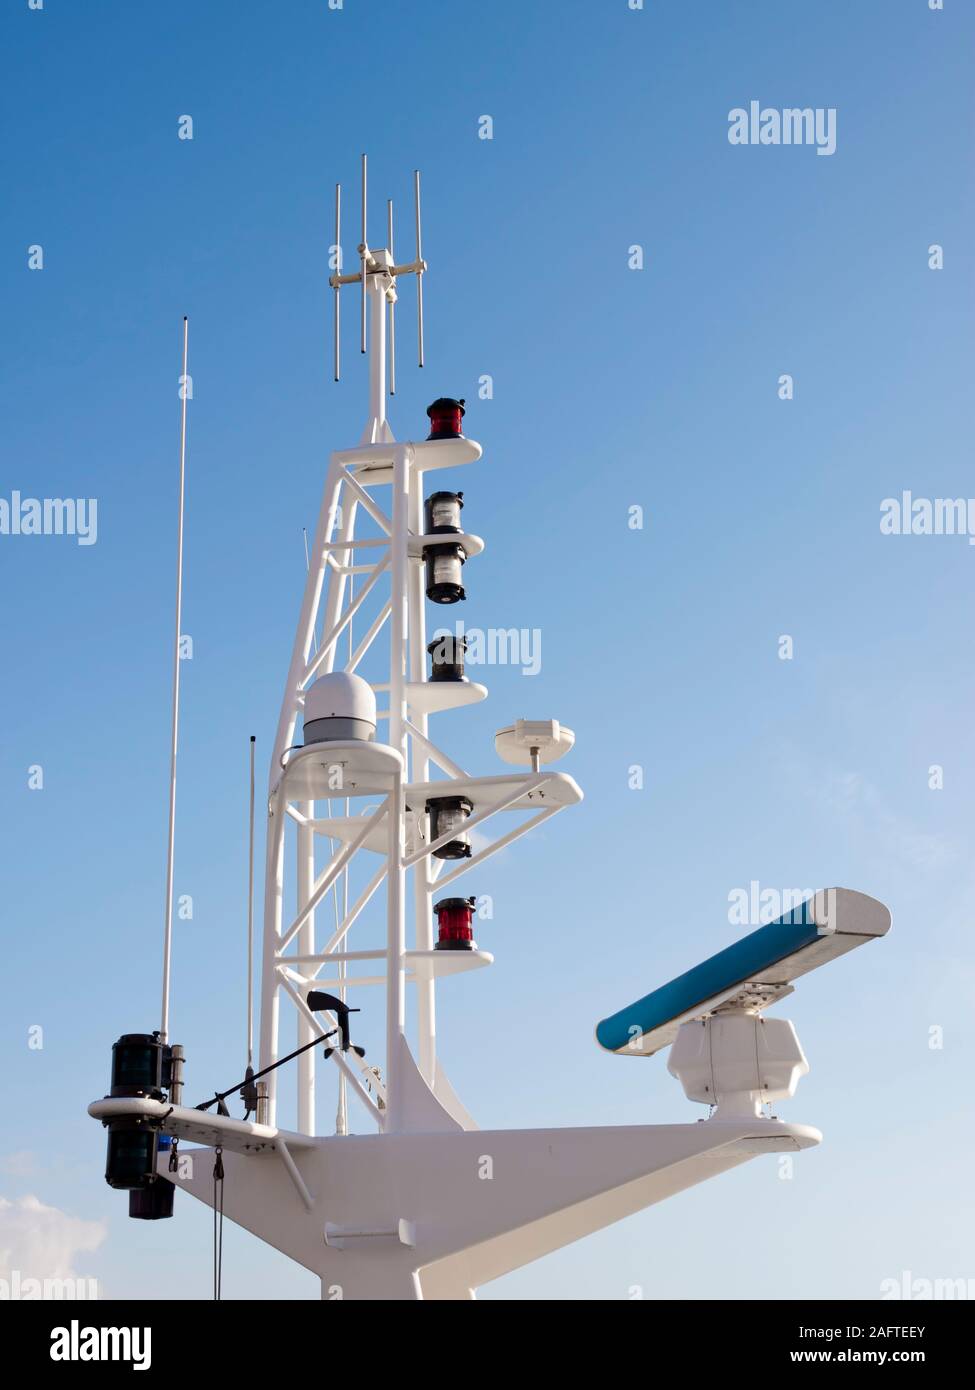 Antennas, radar, anemometer and other communication and navigation equipment on the mast of a ship. Stock Photo